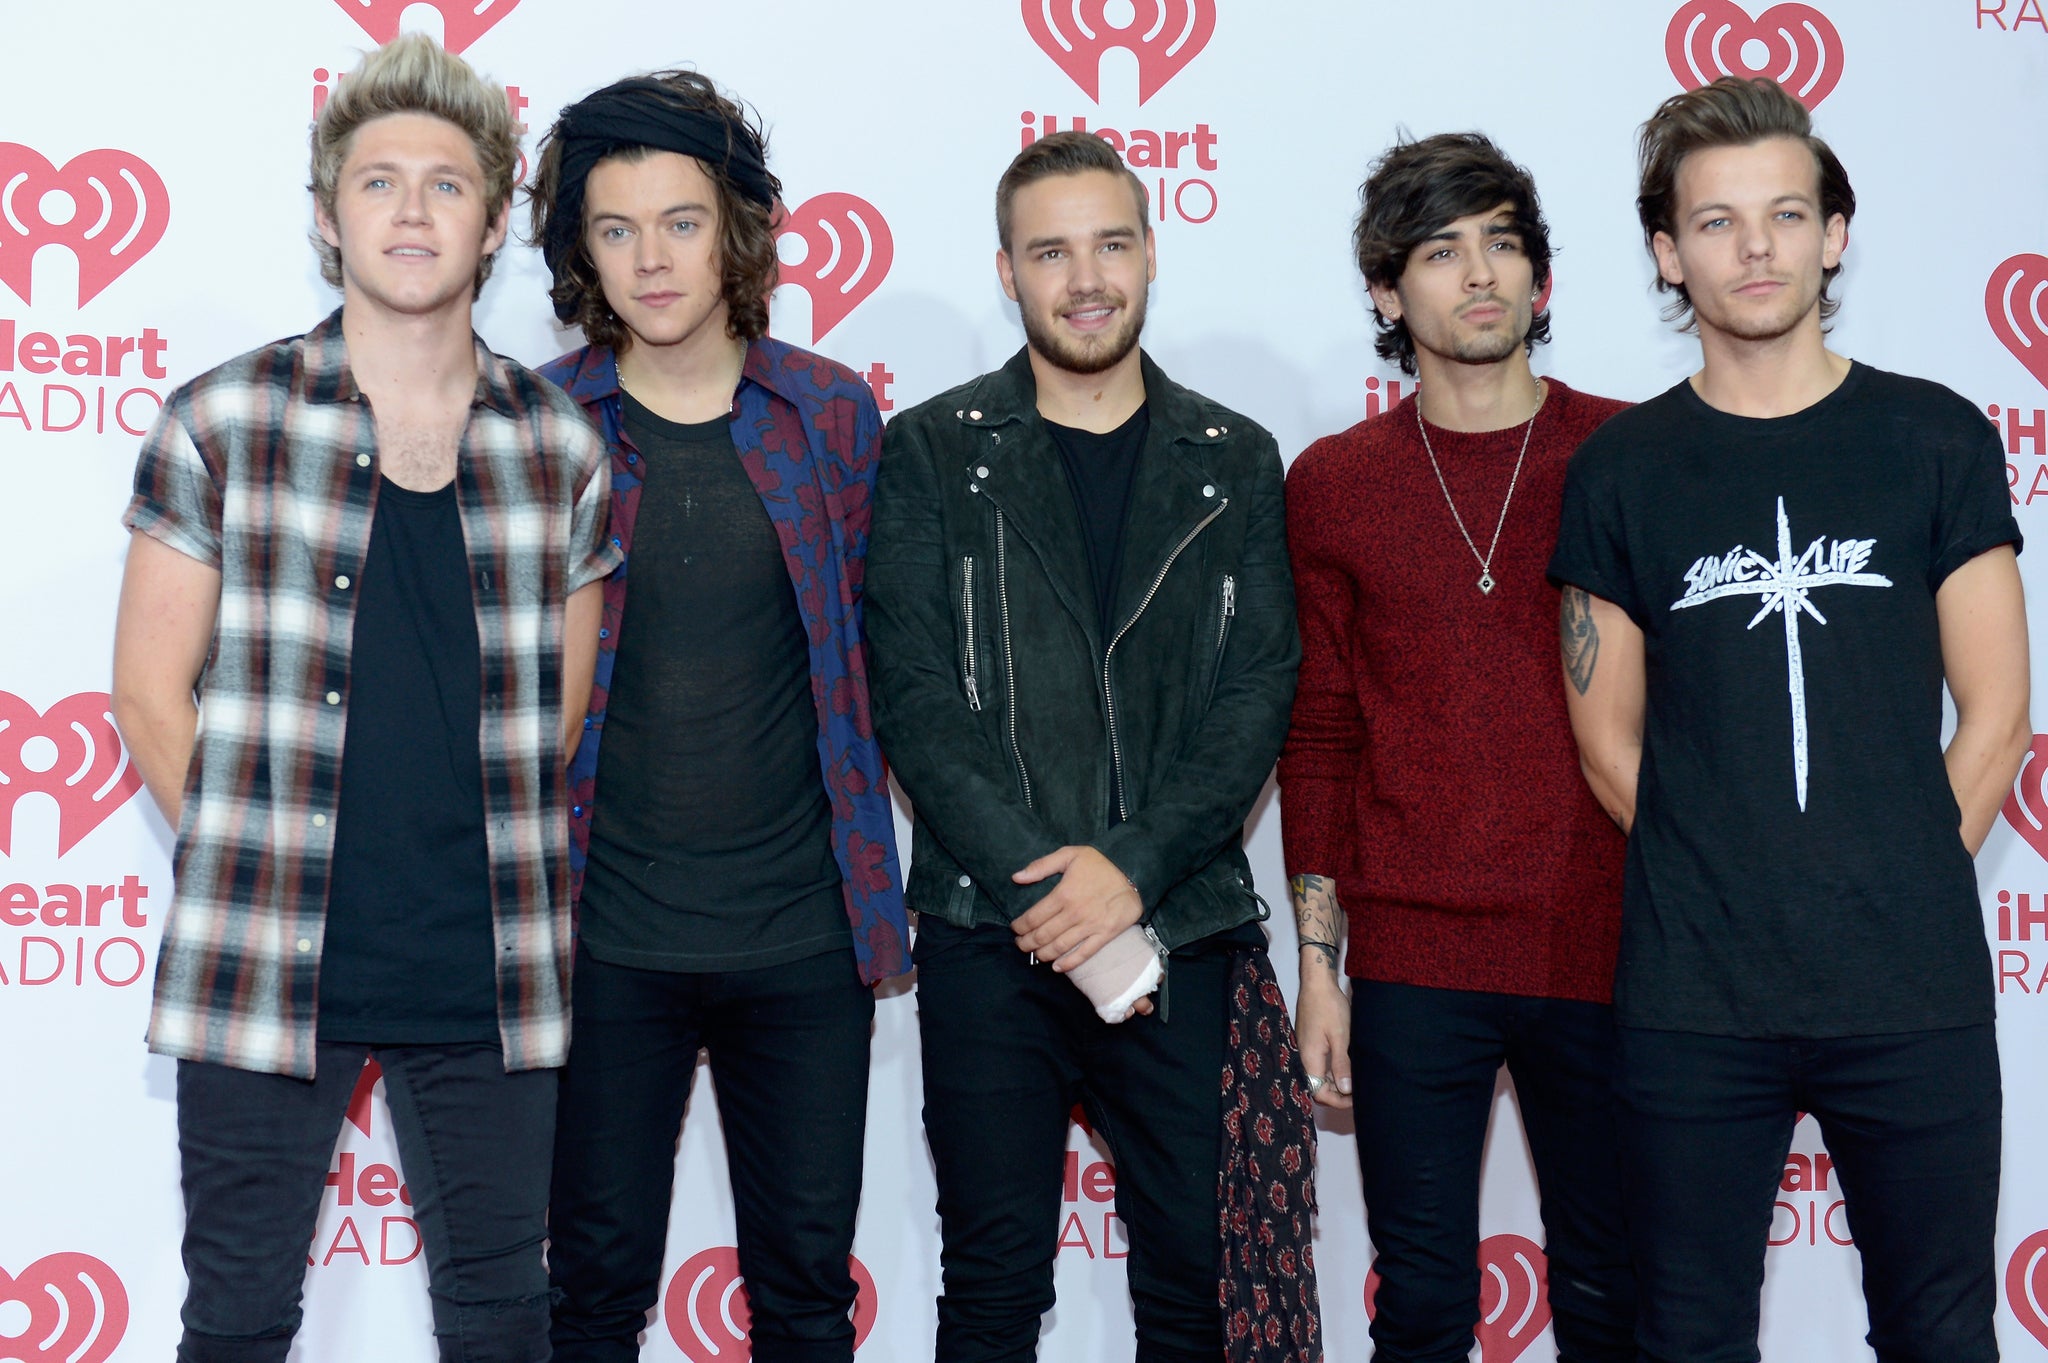 One Direction will take part in this year's Band Aid single